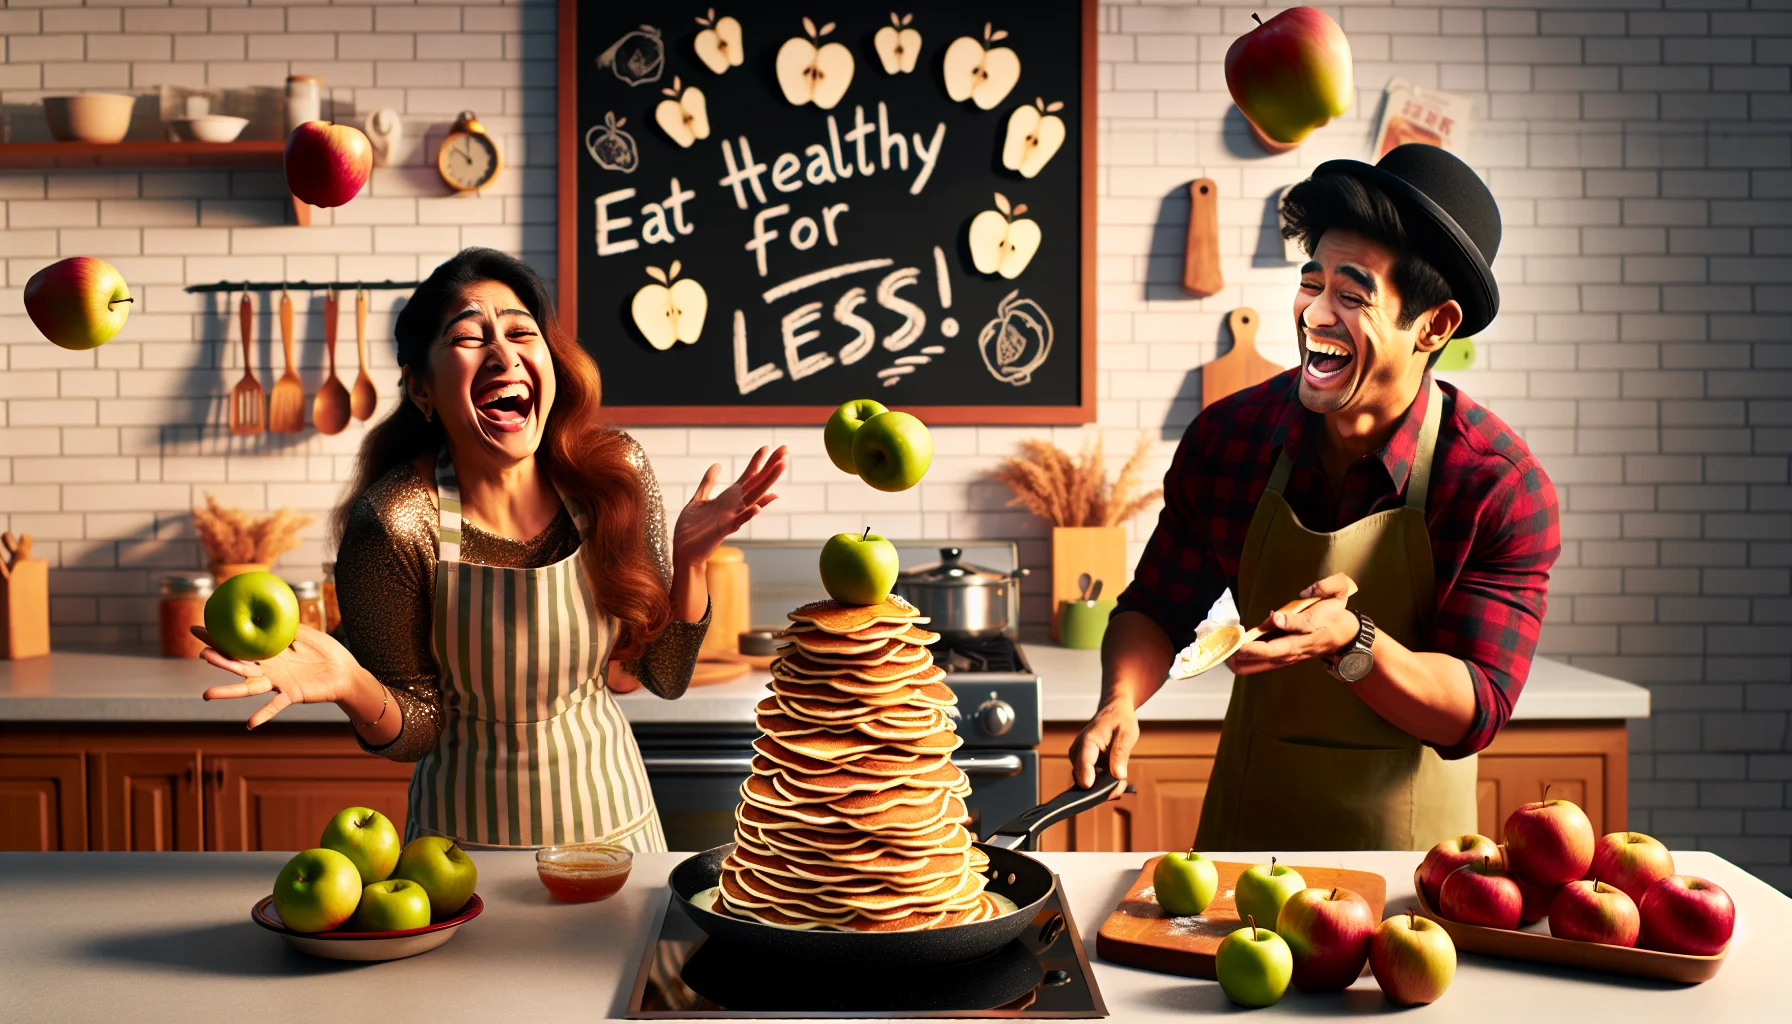 Imagine a humorous scene set in a bright home kitchen. A crisp pile of golden pancakes is artistically arranged to resemble an apple tree, complete with green apple slices as leaves. A South Asian lady, laughing heartily, is flipping more apple pancakes in a sparkling pan. Her Hispanic male companion is playfully juggling apples, attempting to toss one directly onto the pancake 'tree'. Behind them, a chalkboard reads, 'Eat Healthy for Less!' with sketches of pancakes, apples, price tags and silly cartoons. The atmosphere is warm, enticing, and radiates creativity with apple recipes.